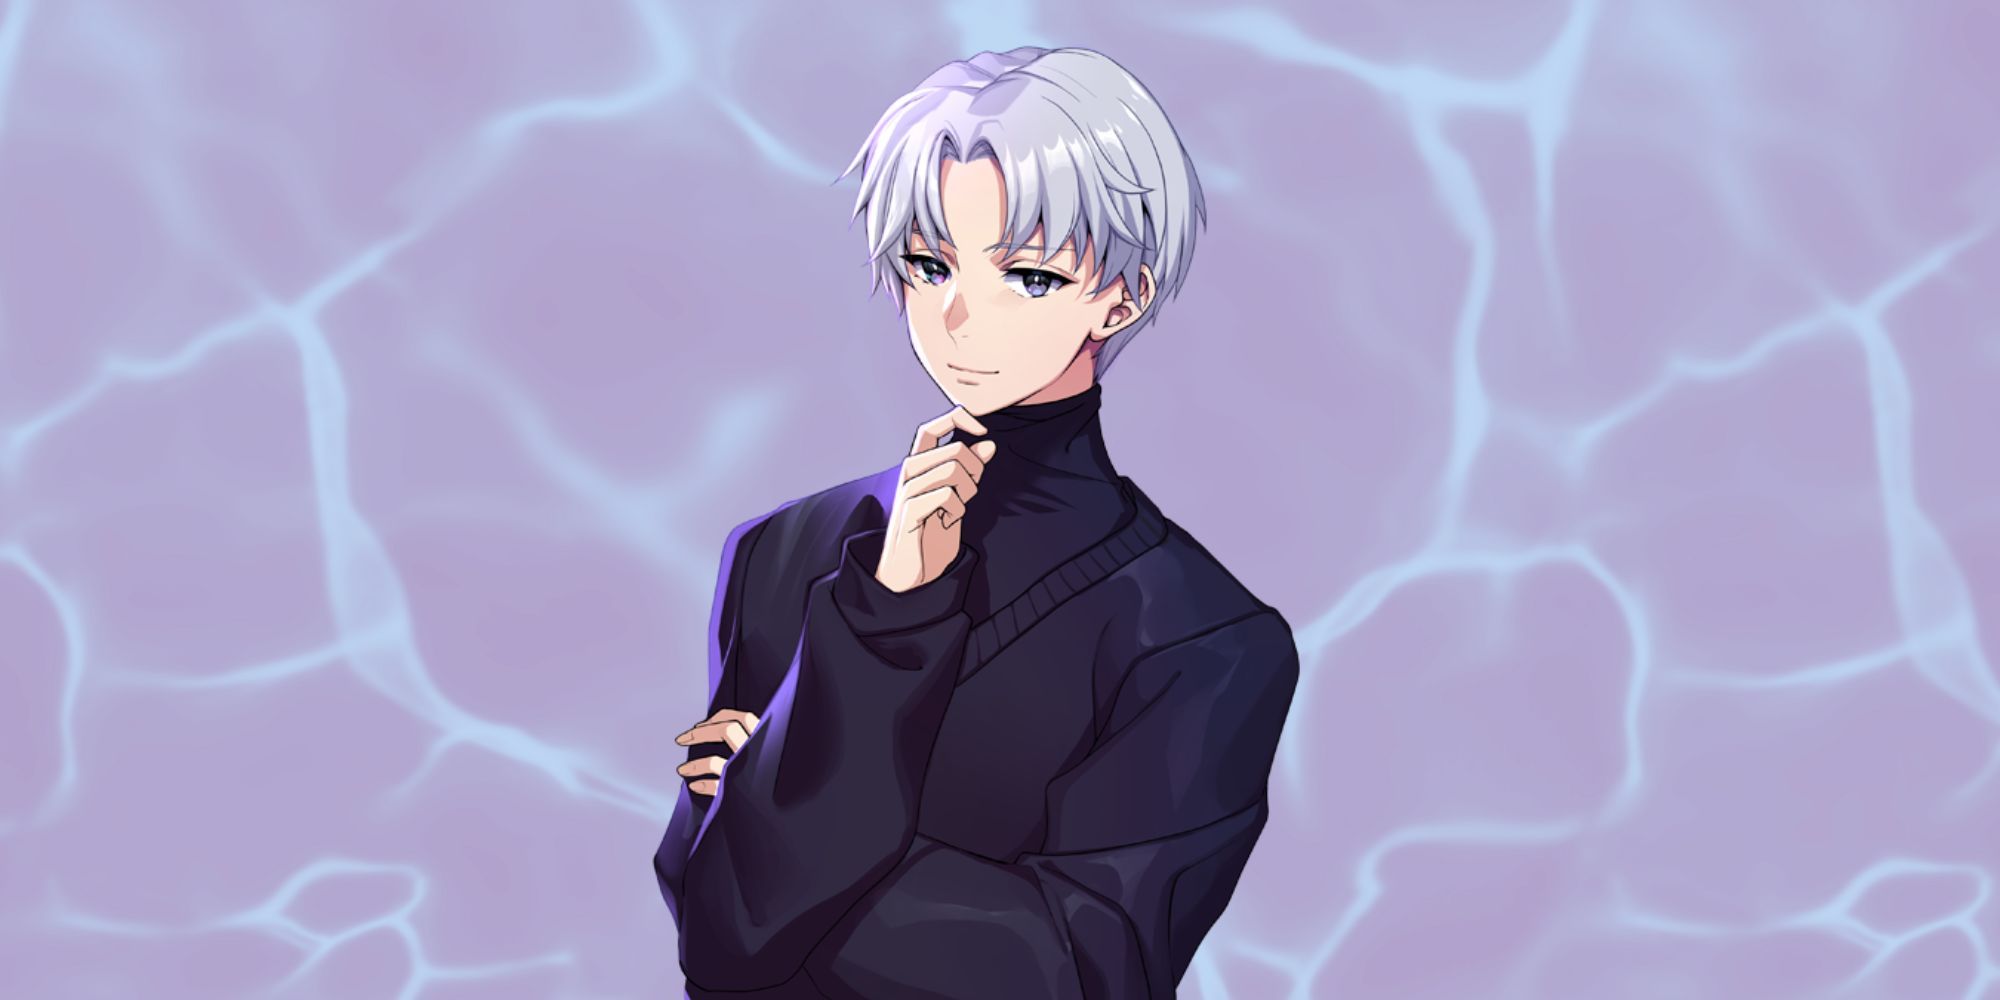 Yohan posing with a lavender background in Eternights.